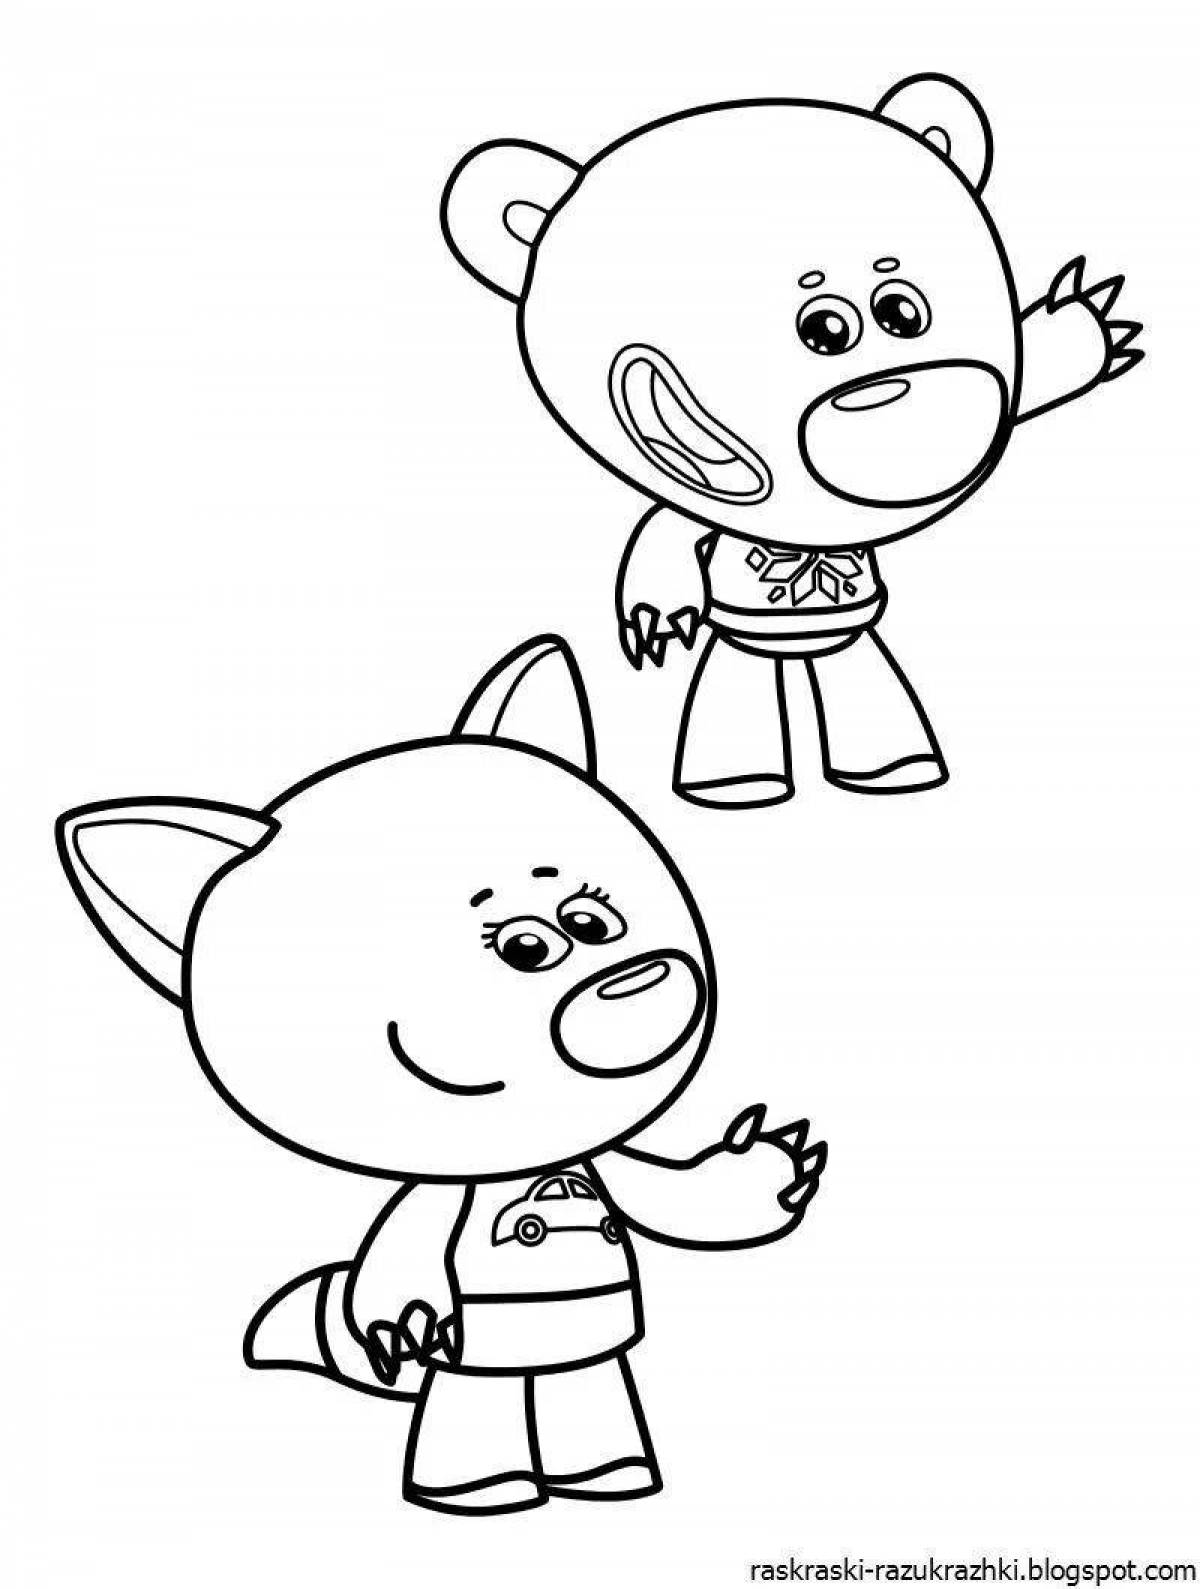 Funny coloring pages with bears for girls